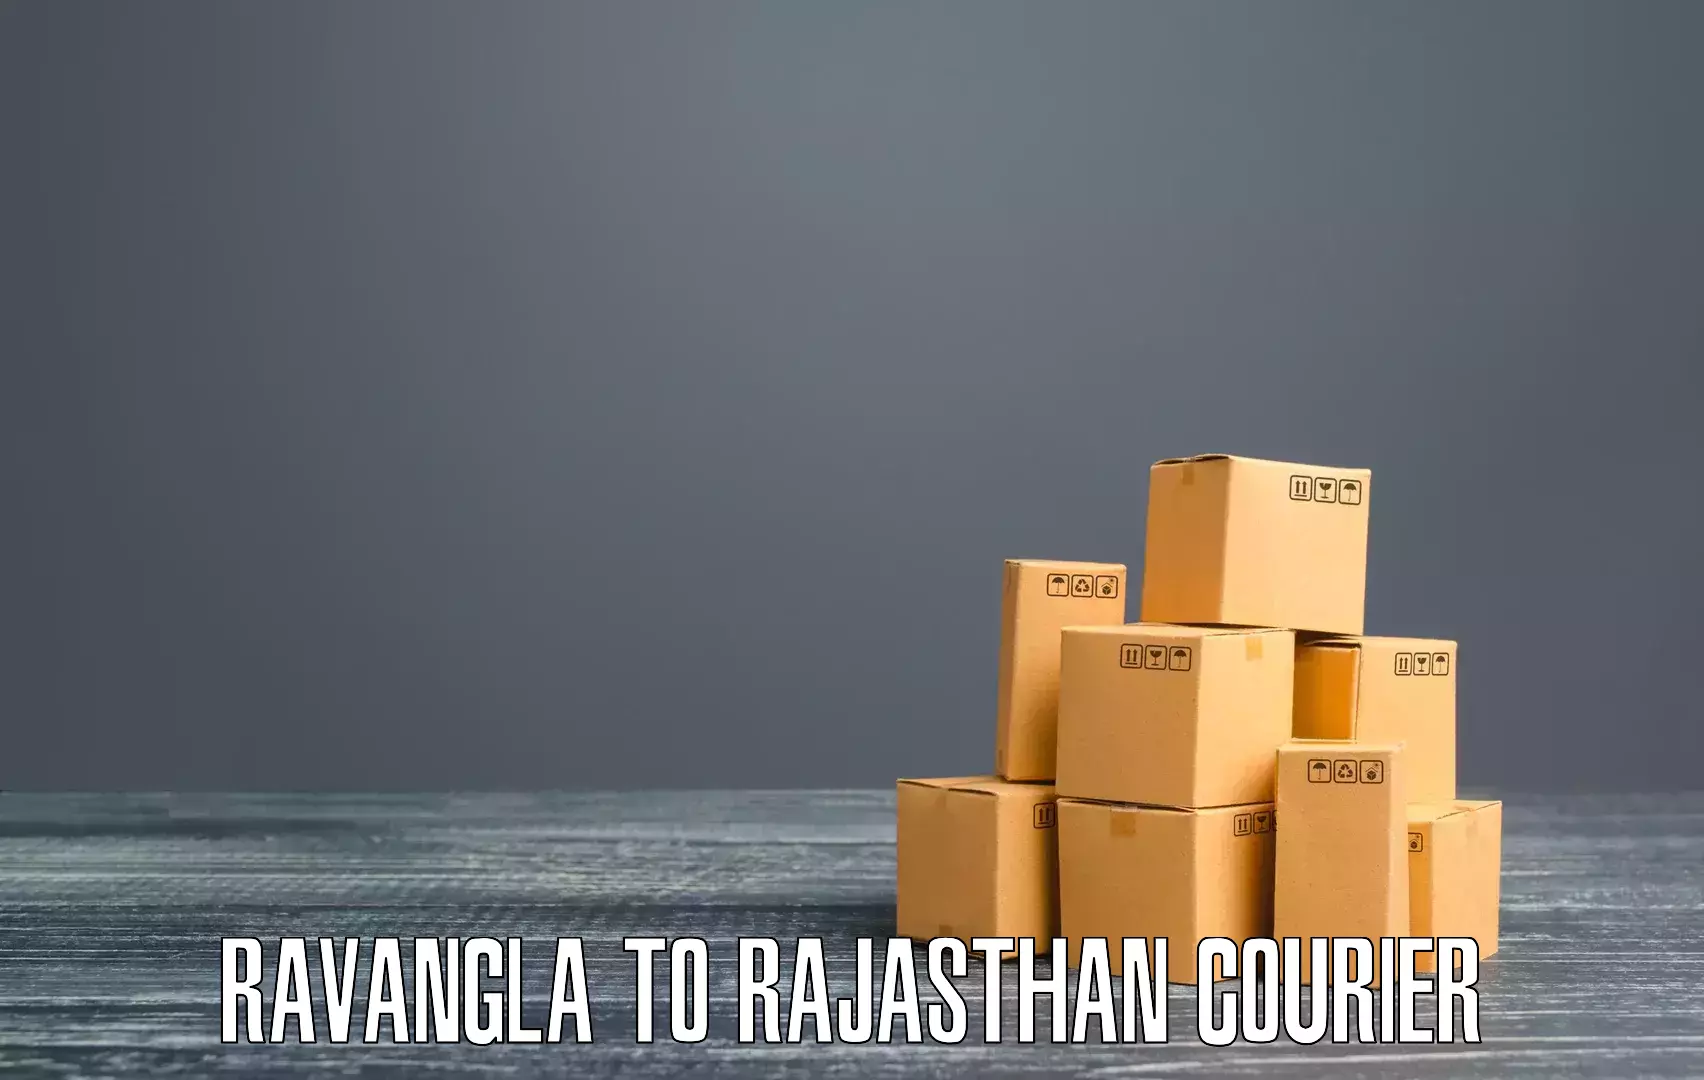 State-of-the-art courier technology Ravangla to Asind